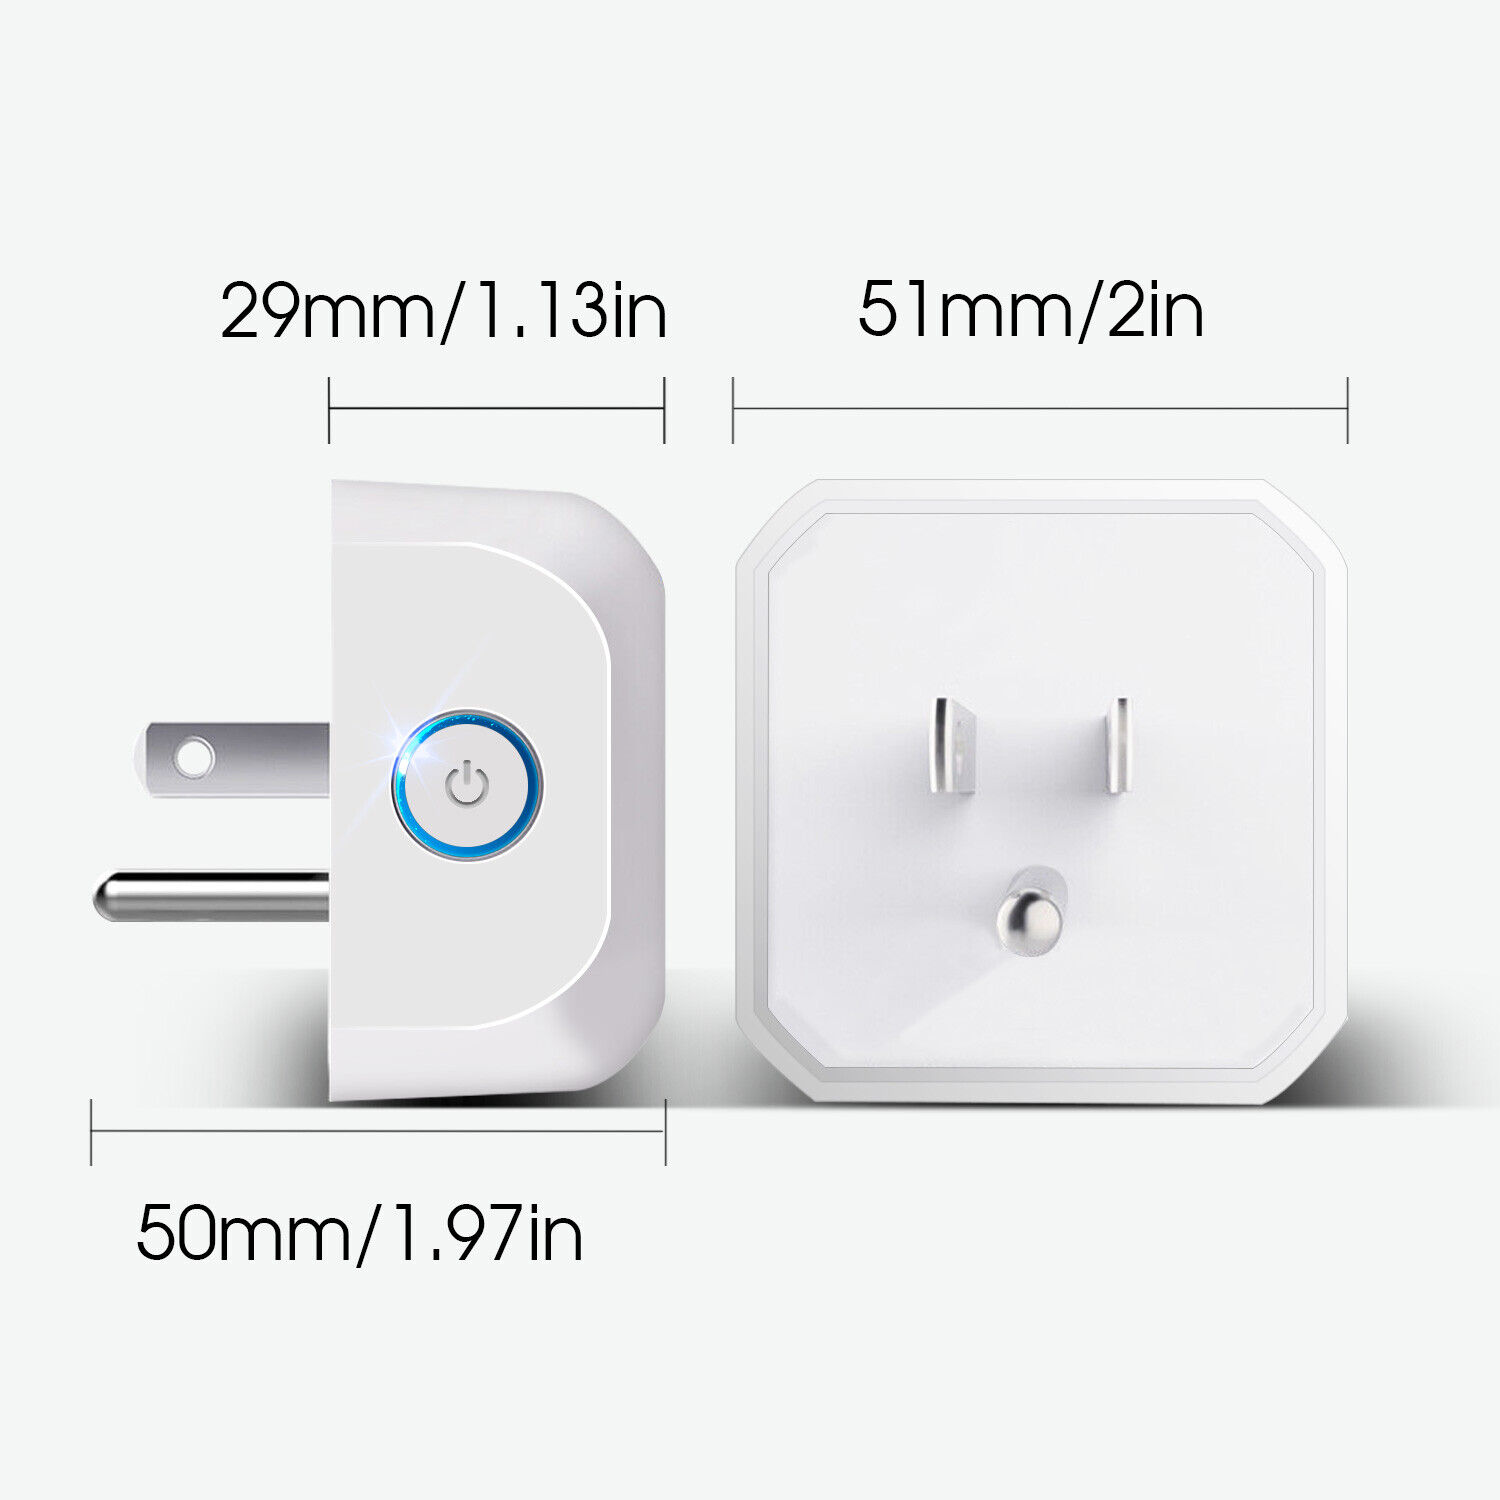 2X Smart WiFi US Plug Outlet Remote Control Timer Switch Socket Alexa Googlehome Kootion Does not apply - фотография #7